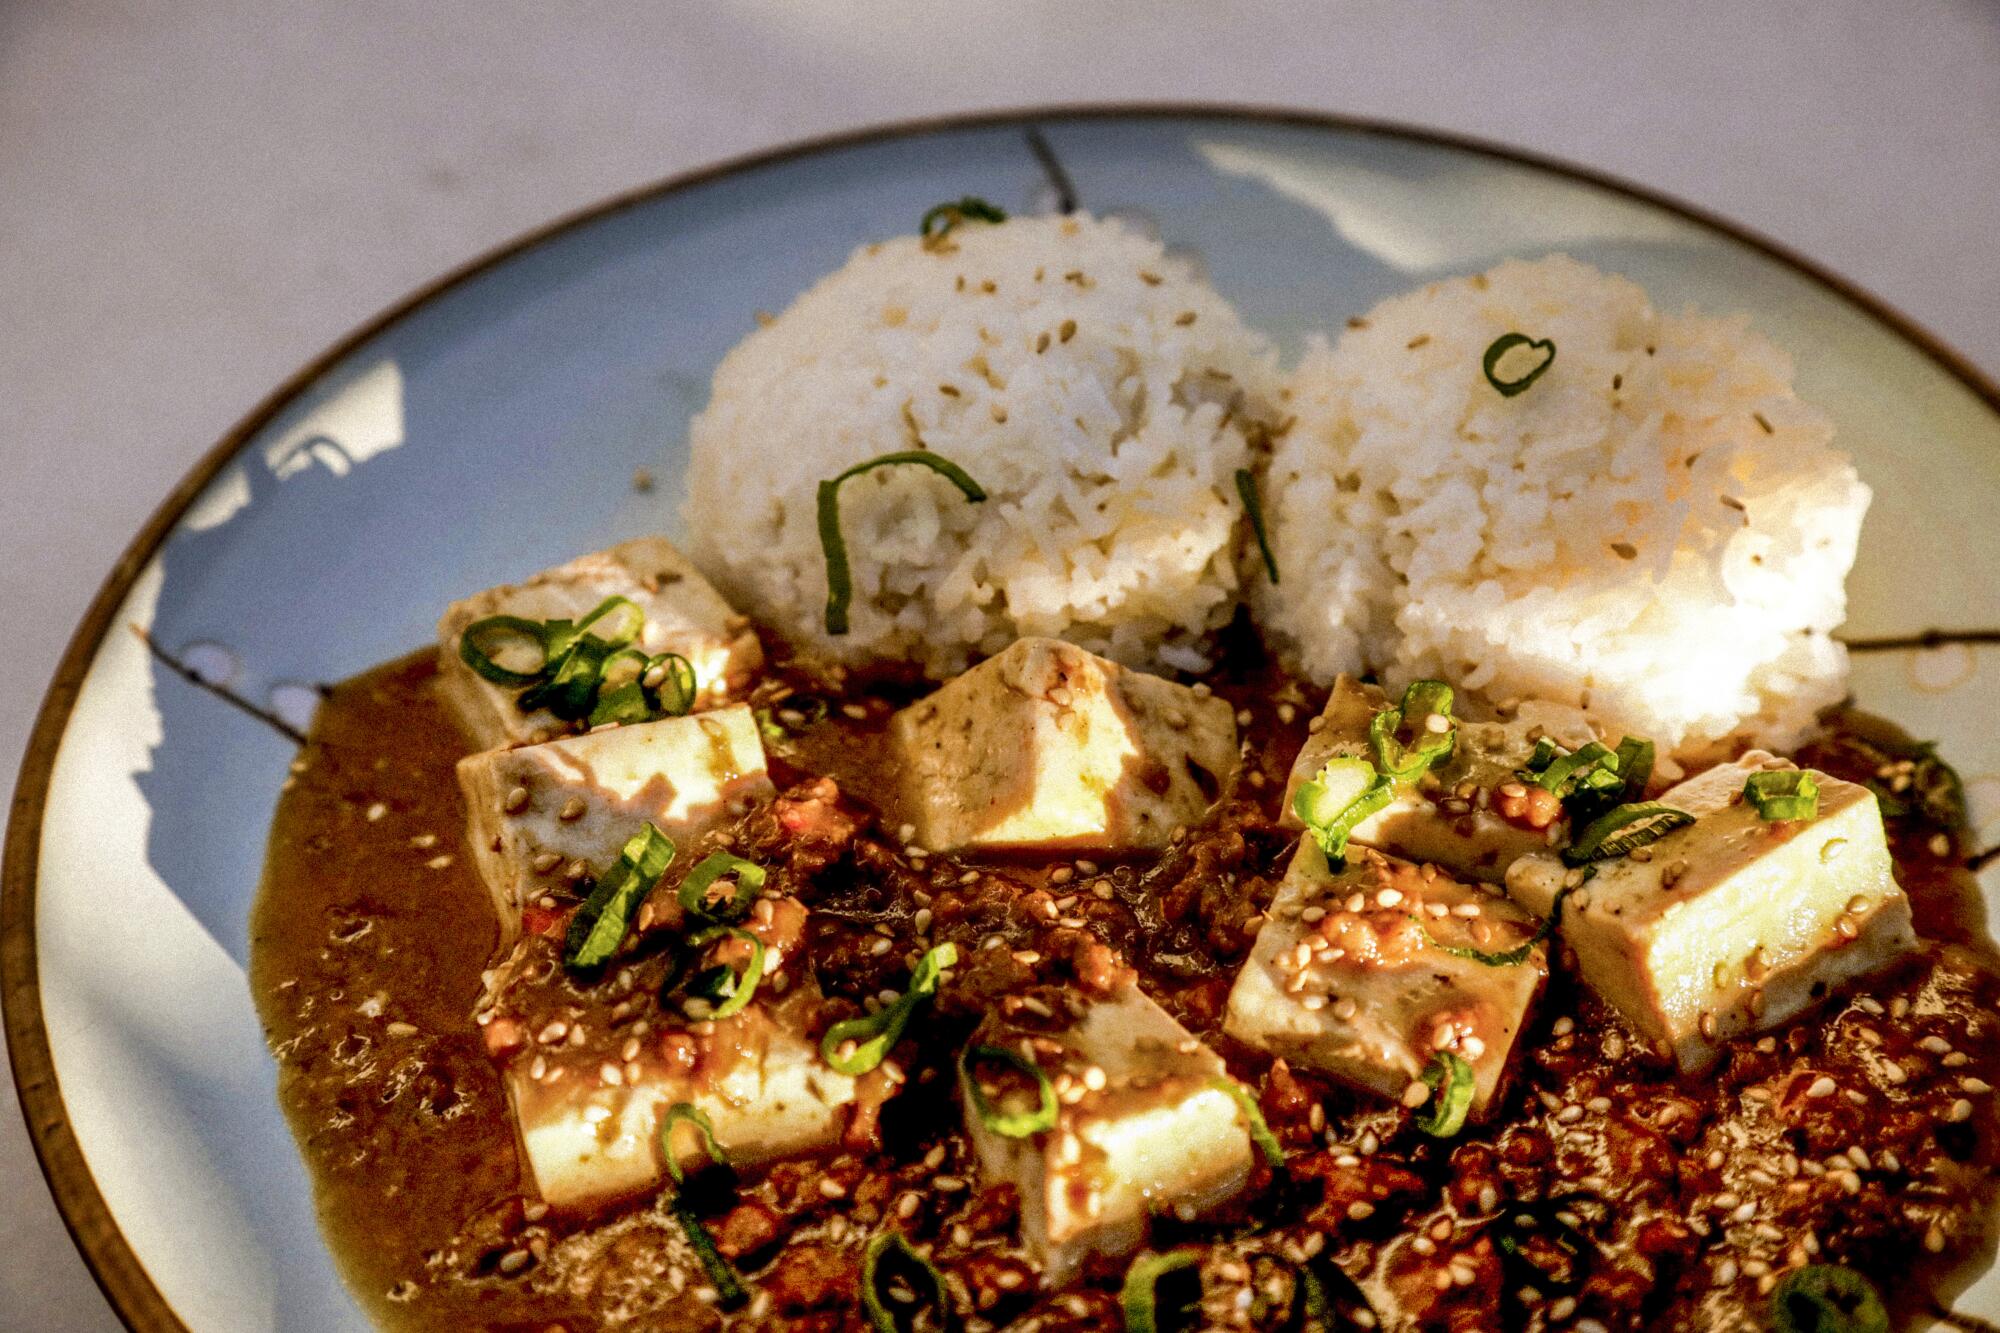 Mapo tofu is on the menu at Morning Nights' restaurant.